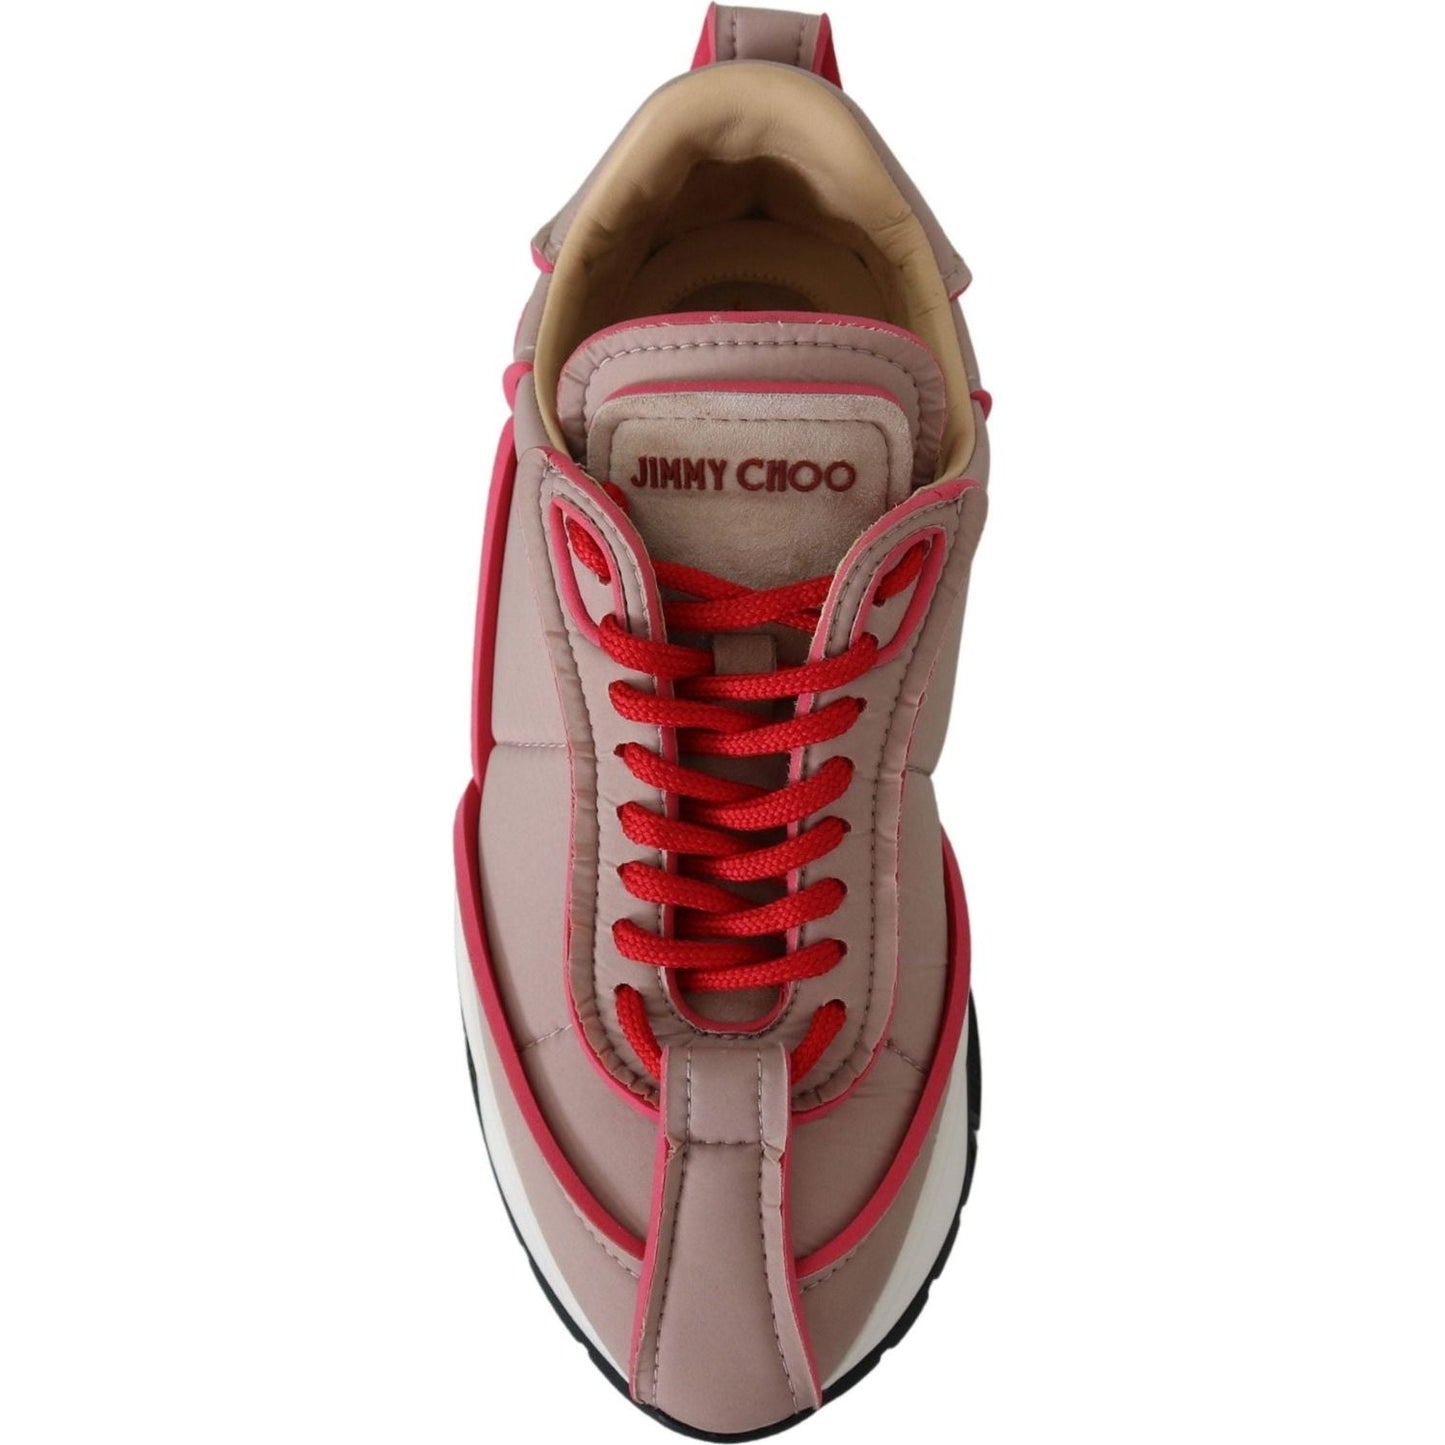 Jimmy Choo Ballet Pink Chic Padded Sneakers ballet-pink-and-red-raine-sneakers